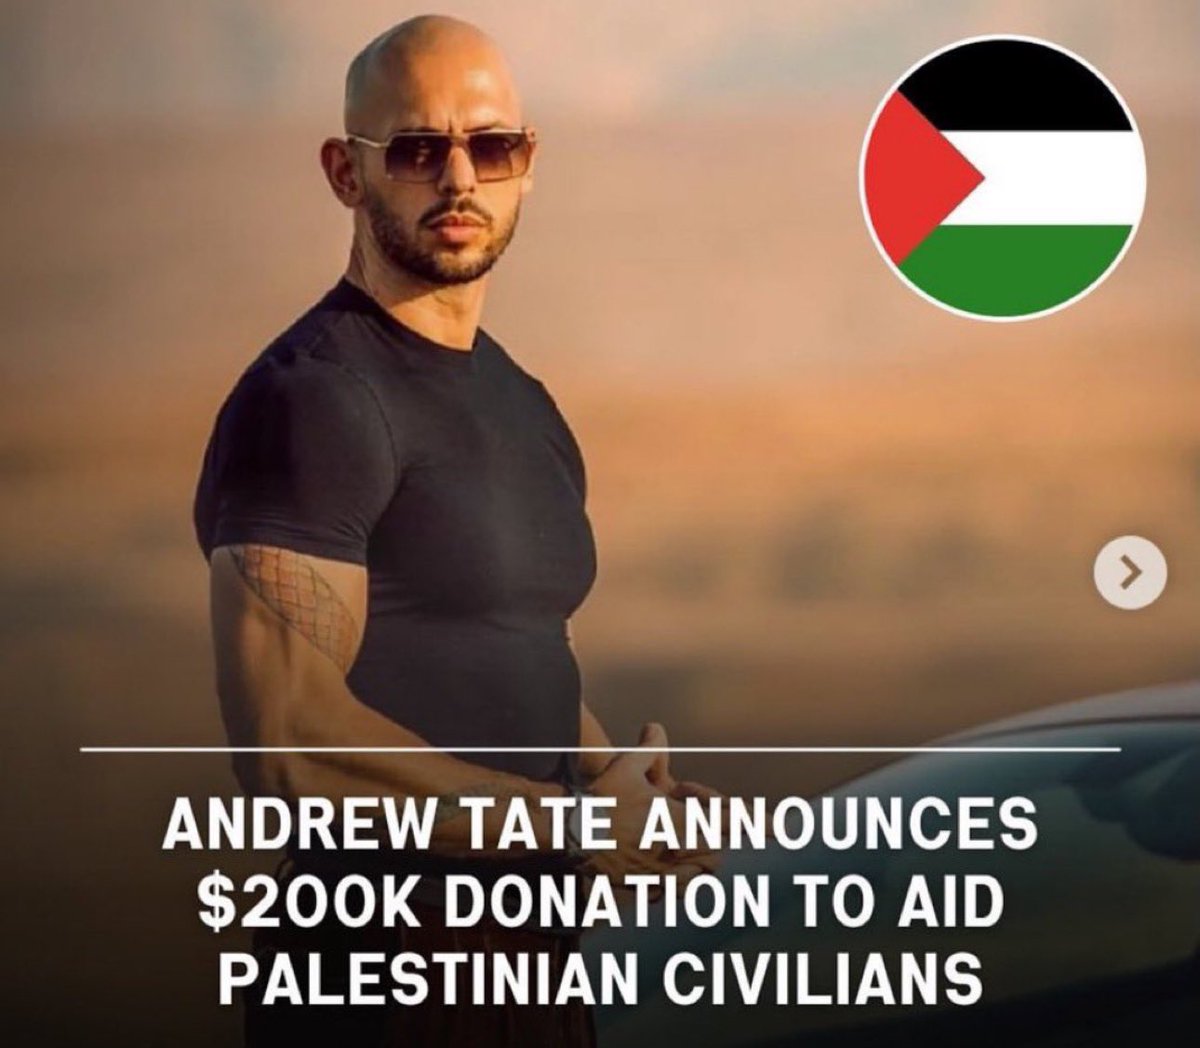 ANDREW TATE ANNOUNCED $200,000 DONATION TO AID PALESTINIAN CIVILIANS

@Cobratate